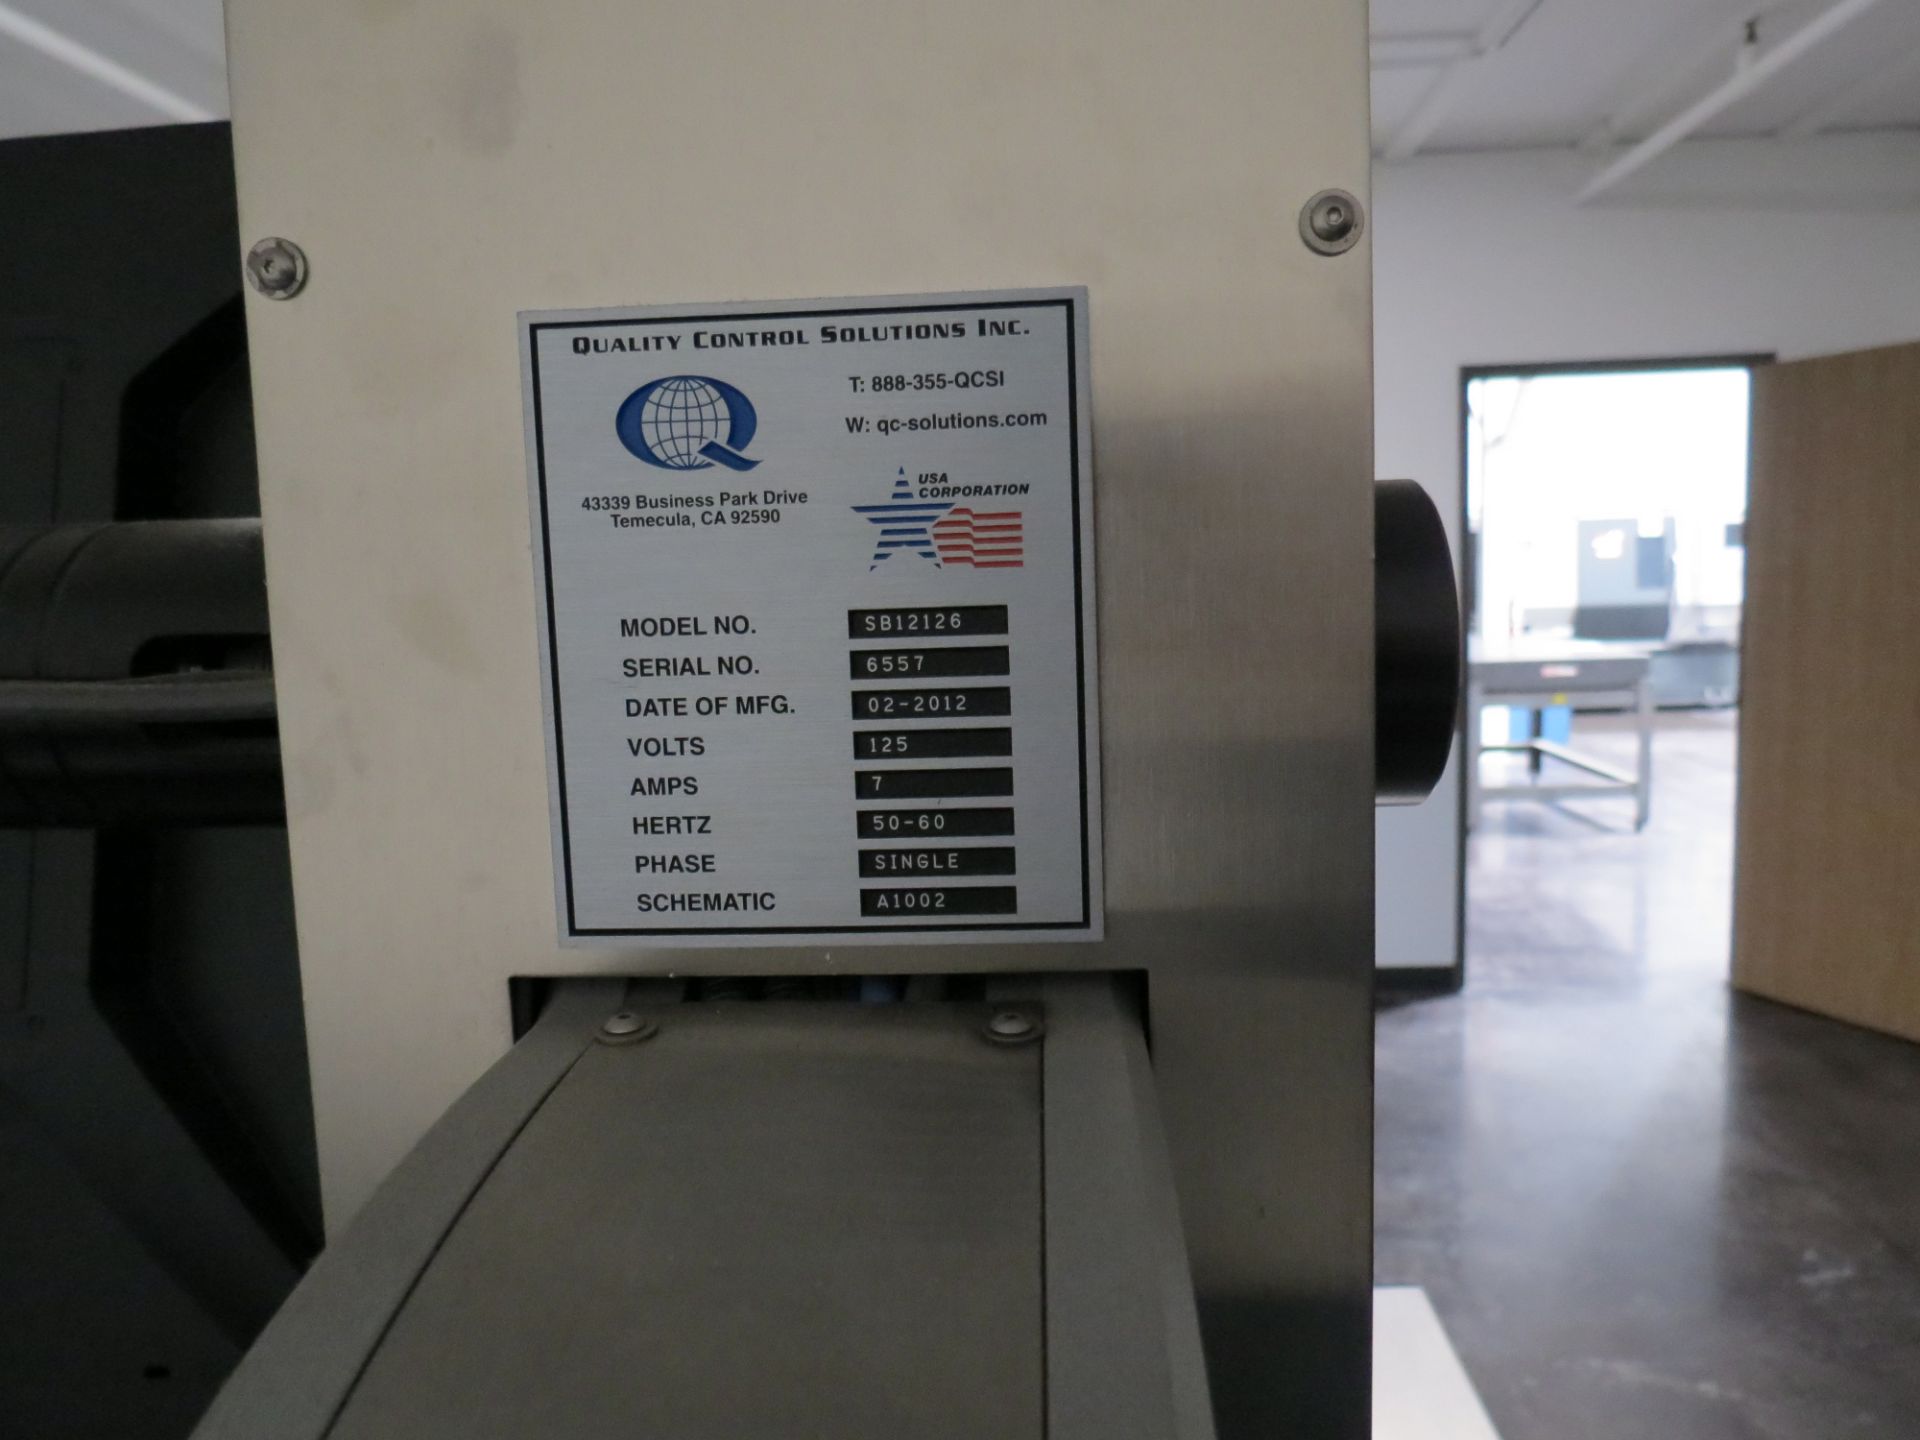 2012 QUALITY CONTROL SOLUTIONS INC. SEEBREZ MDL: SB12126 VIDEO MEASURING SYSTEM SN: 6557, 125V, 1PH, - Image 5 of 10